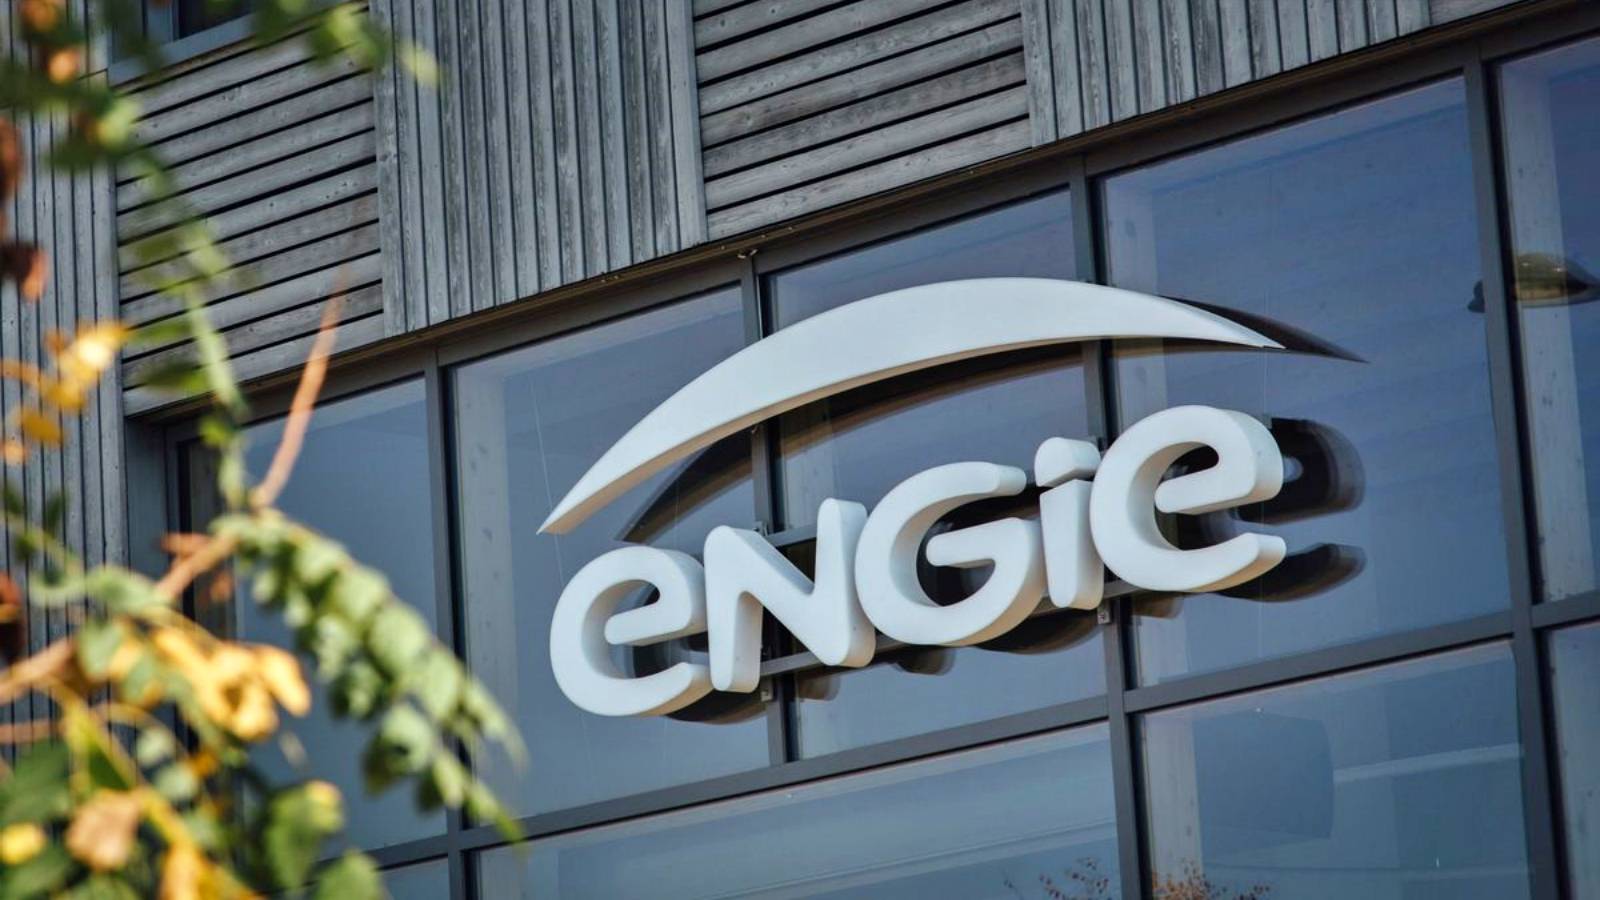 Engie IMPORTANT Information Romanian Customers Must Know